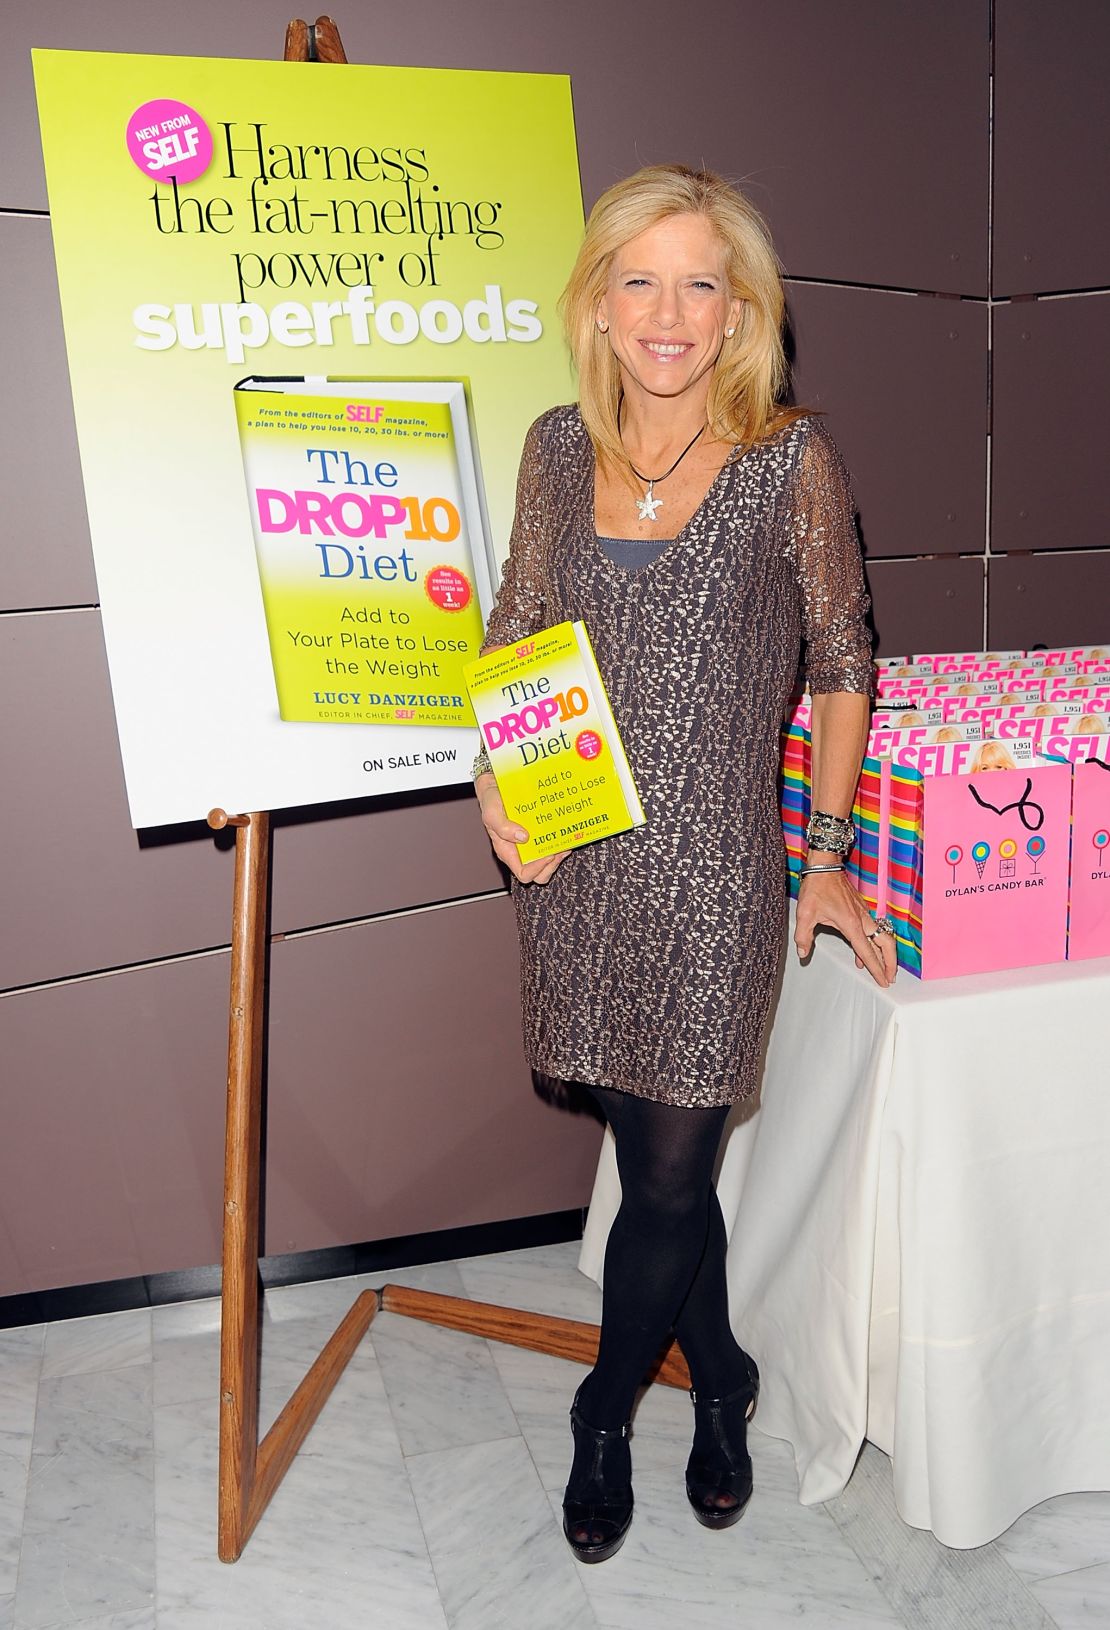 Lucy Danziger is the editor-in-chief at SELF magazine and the author of "The Drop 10 Diet." 